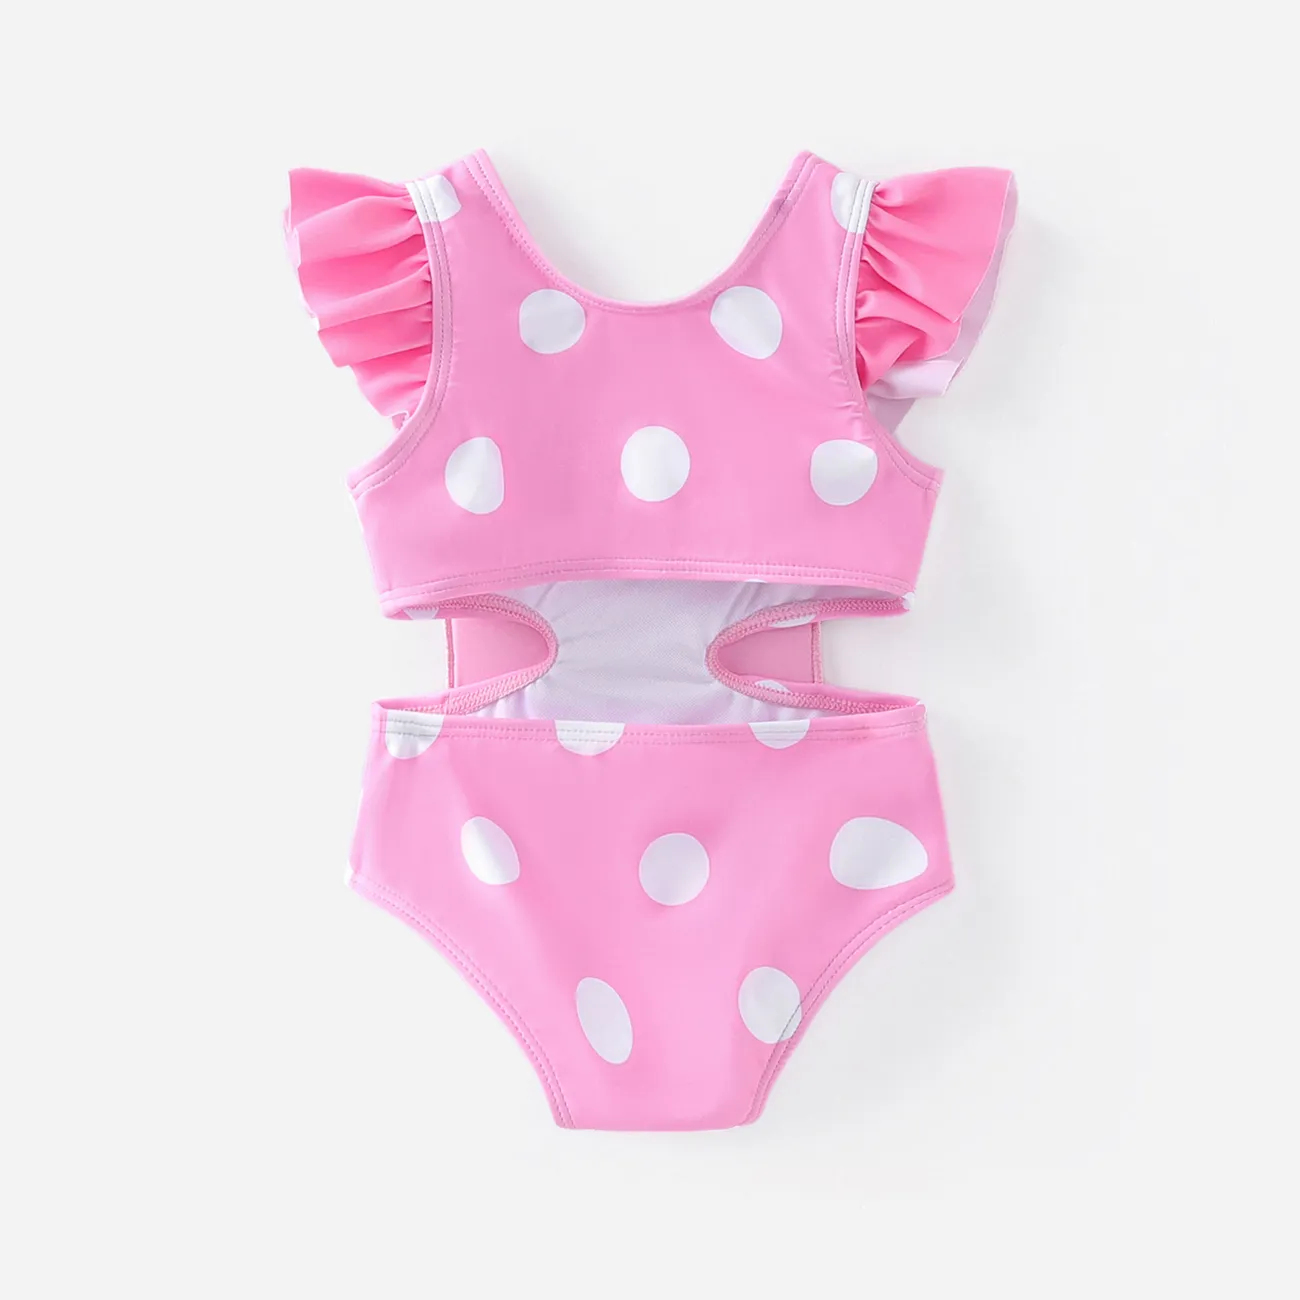 Baby Girl Rabbit/Lion Applique Polka Dots Ruffled One-Piece Swimsuit Pink big image 1